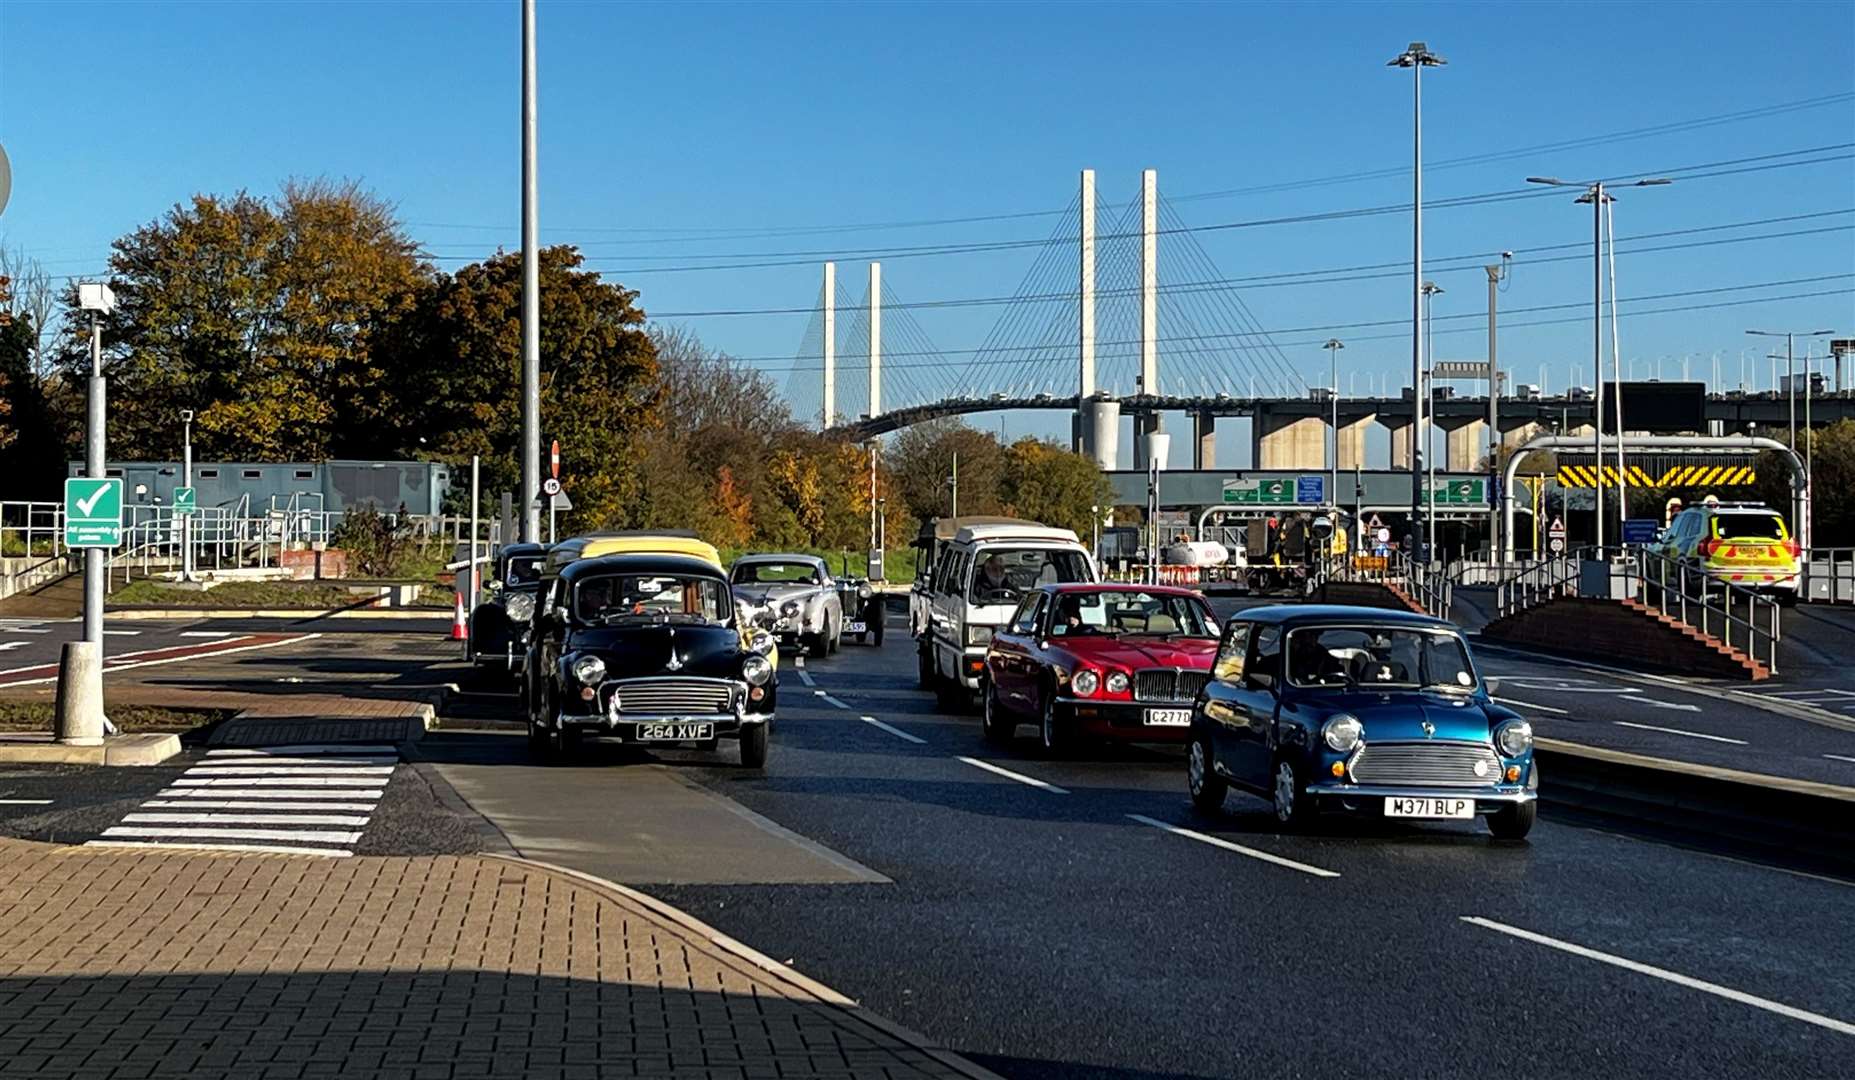 The parade went from the Kent to the Essex side of the Dartford Tunnel to mark its 60th birthday